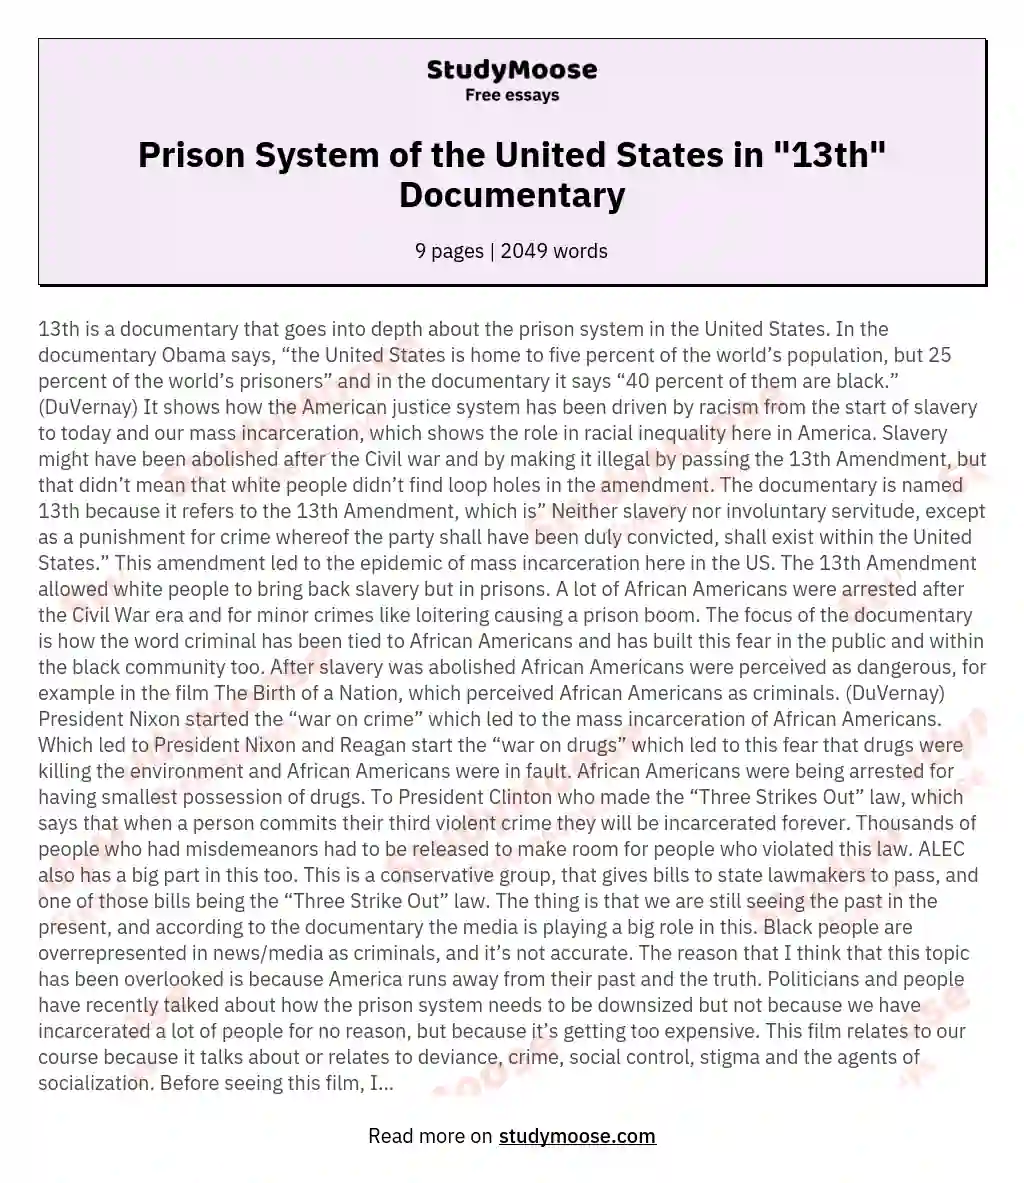 Prison System of the United States in "13th" Documentary essay